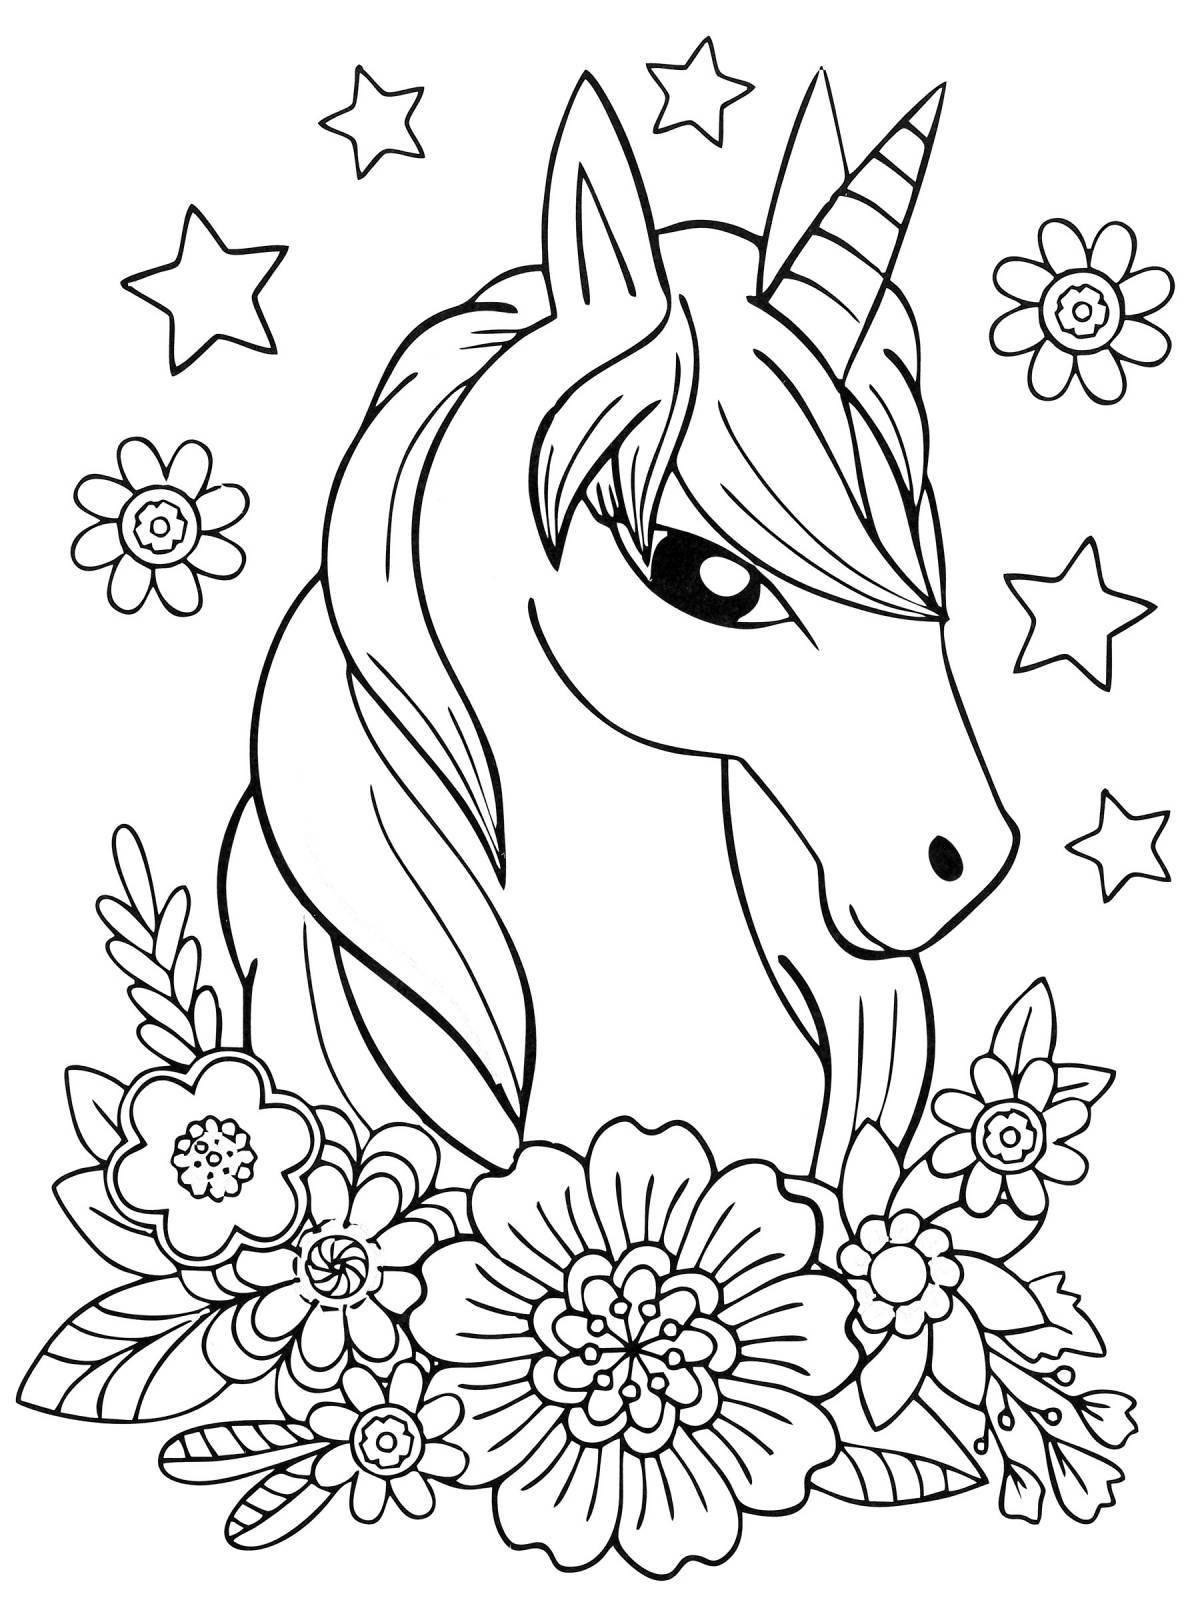 Brilliant coloring for girls 9 years old - very beautiful animals